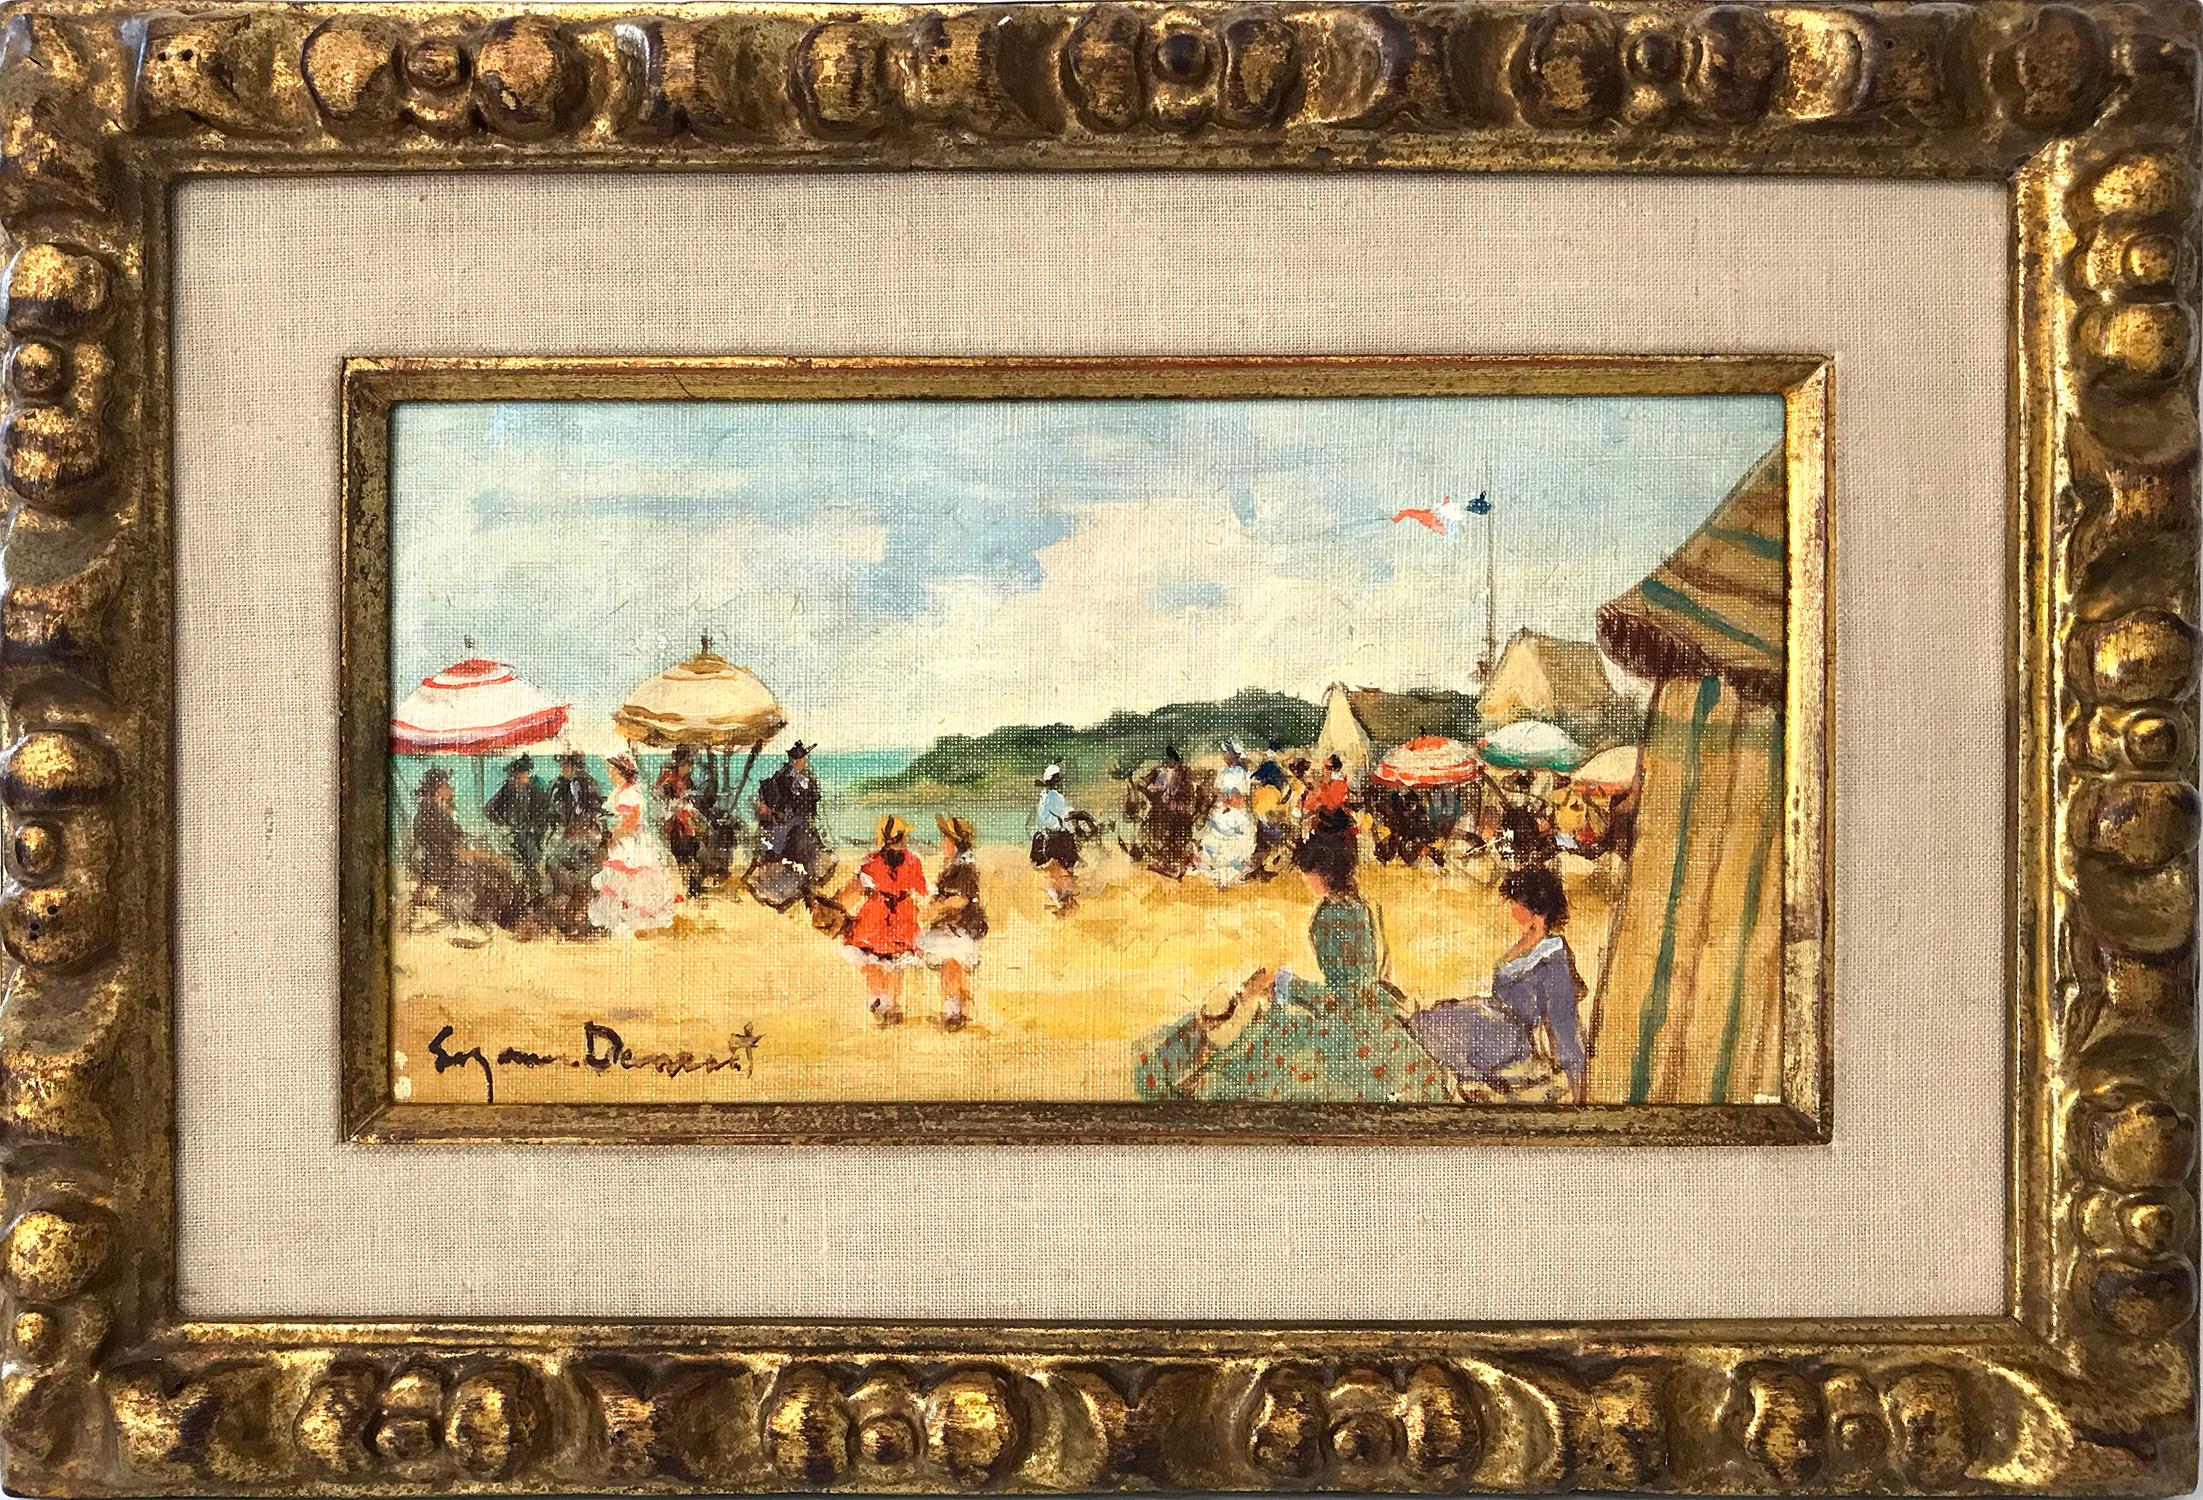 Suzanne Demarest  Figurative Painting - "Beach Scene With Figures" 20th Century American Oil Painting on Canvas